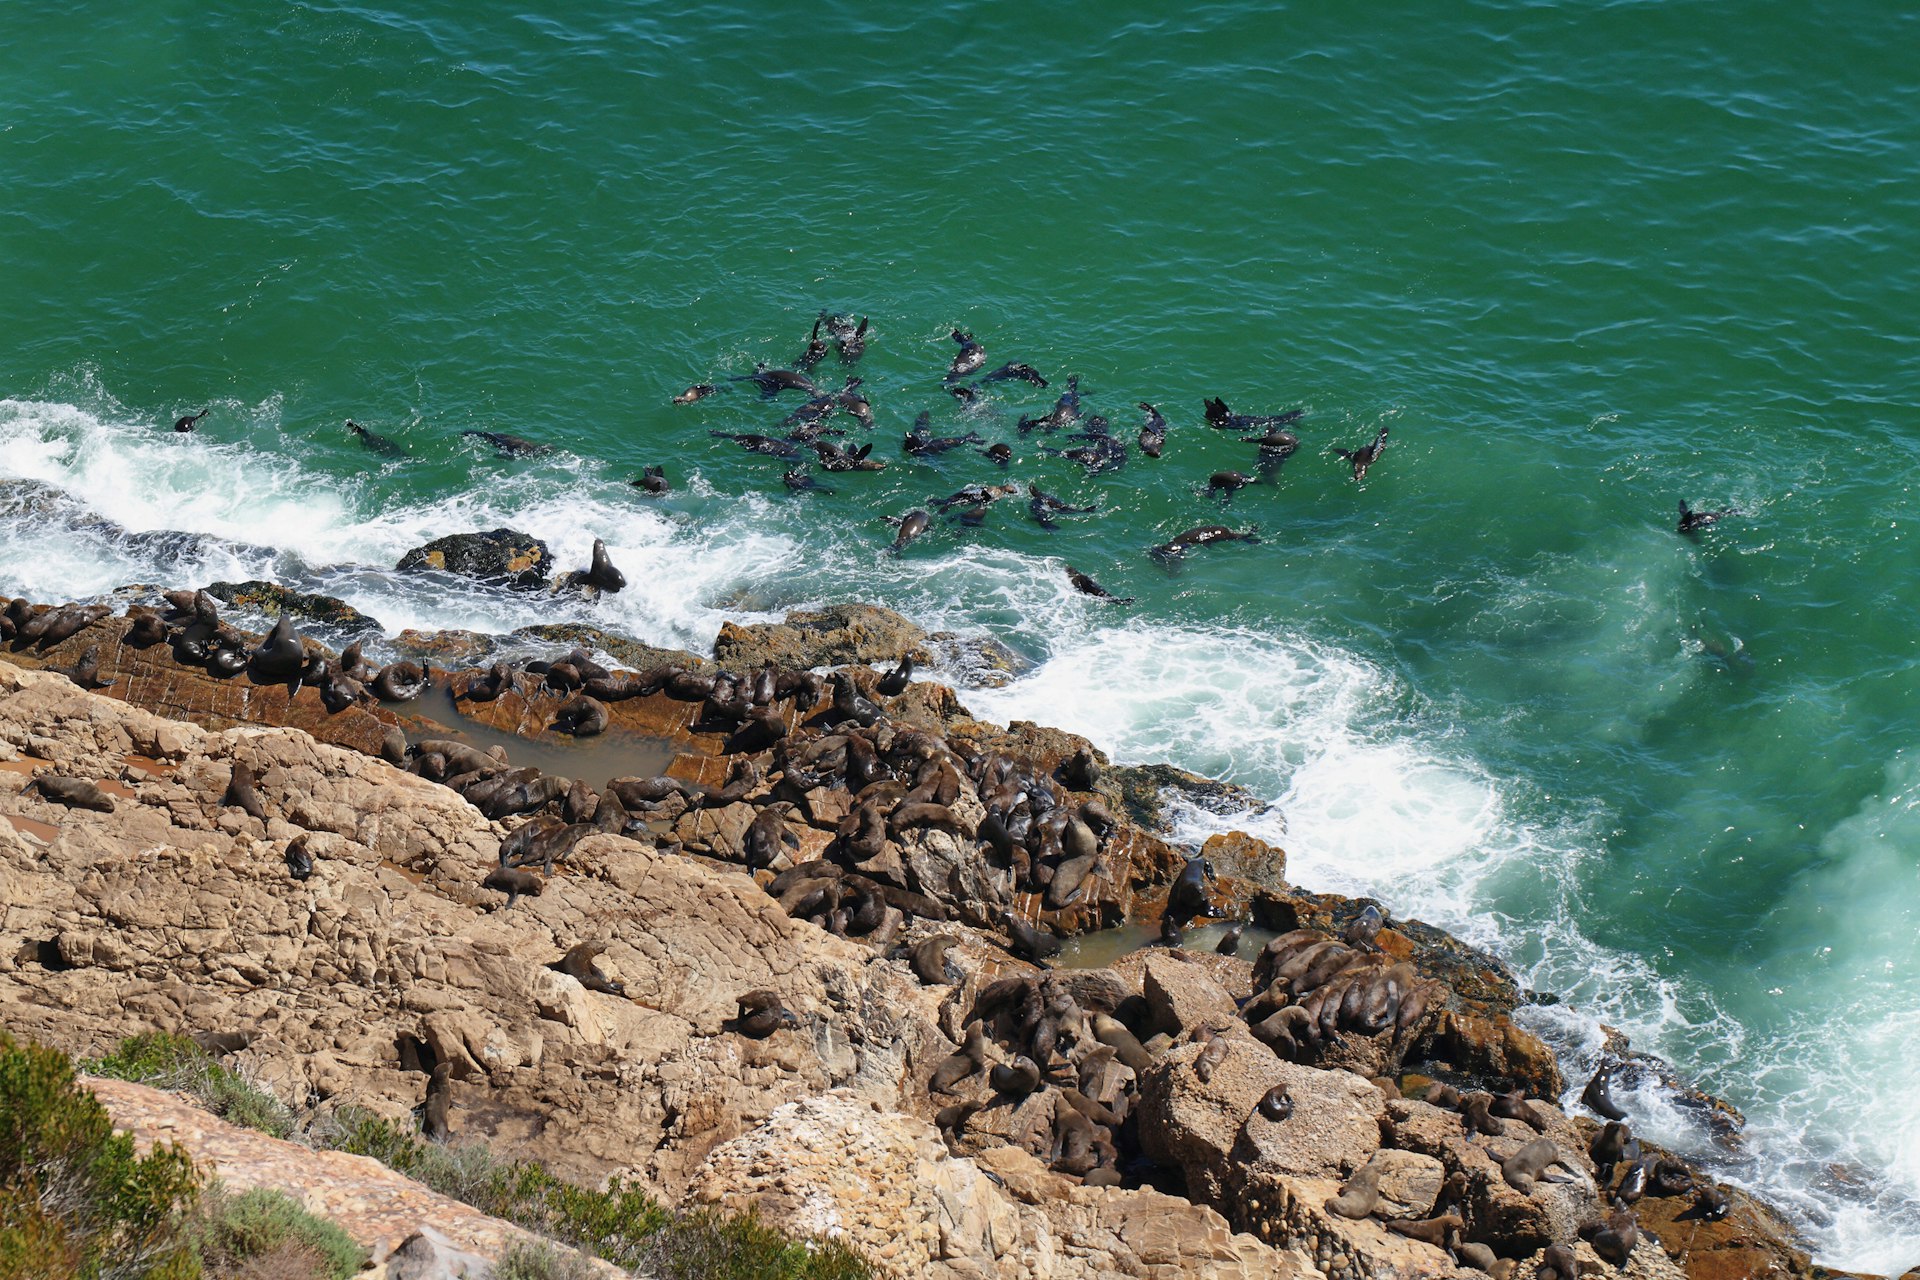 Countless seals swimming off (and on) a rocky shore within Robberg nature reserve.